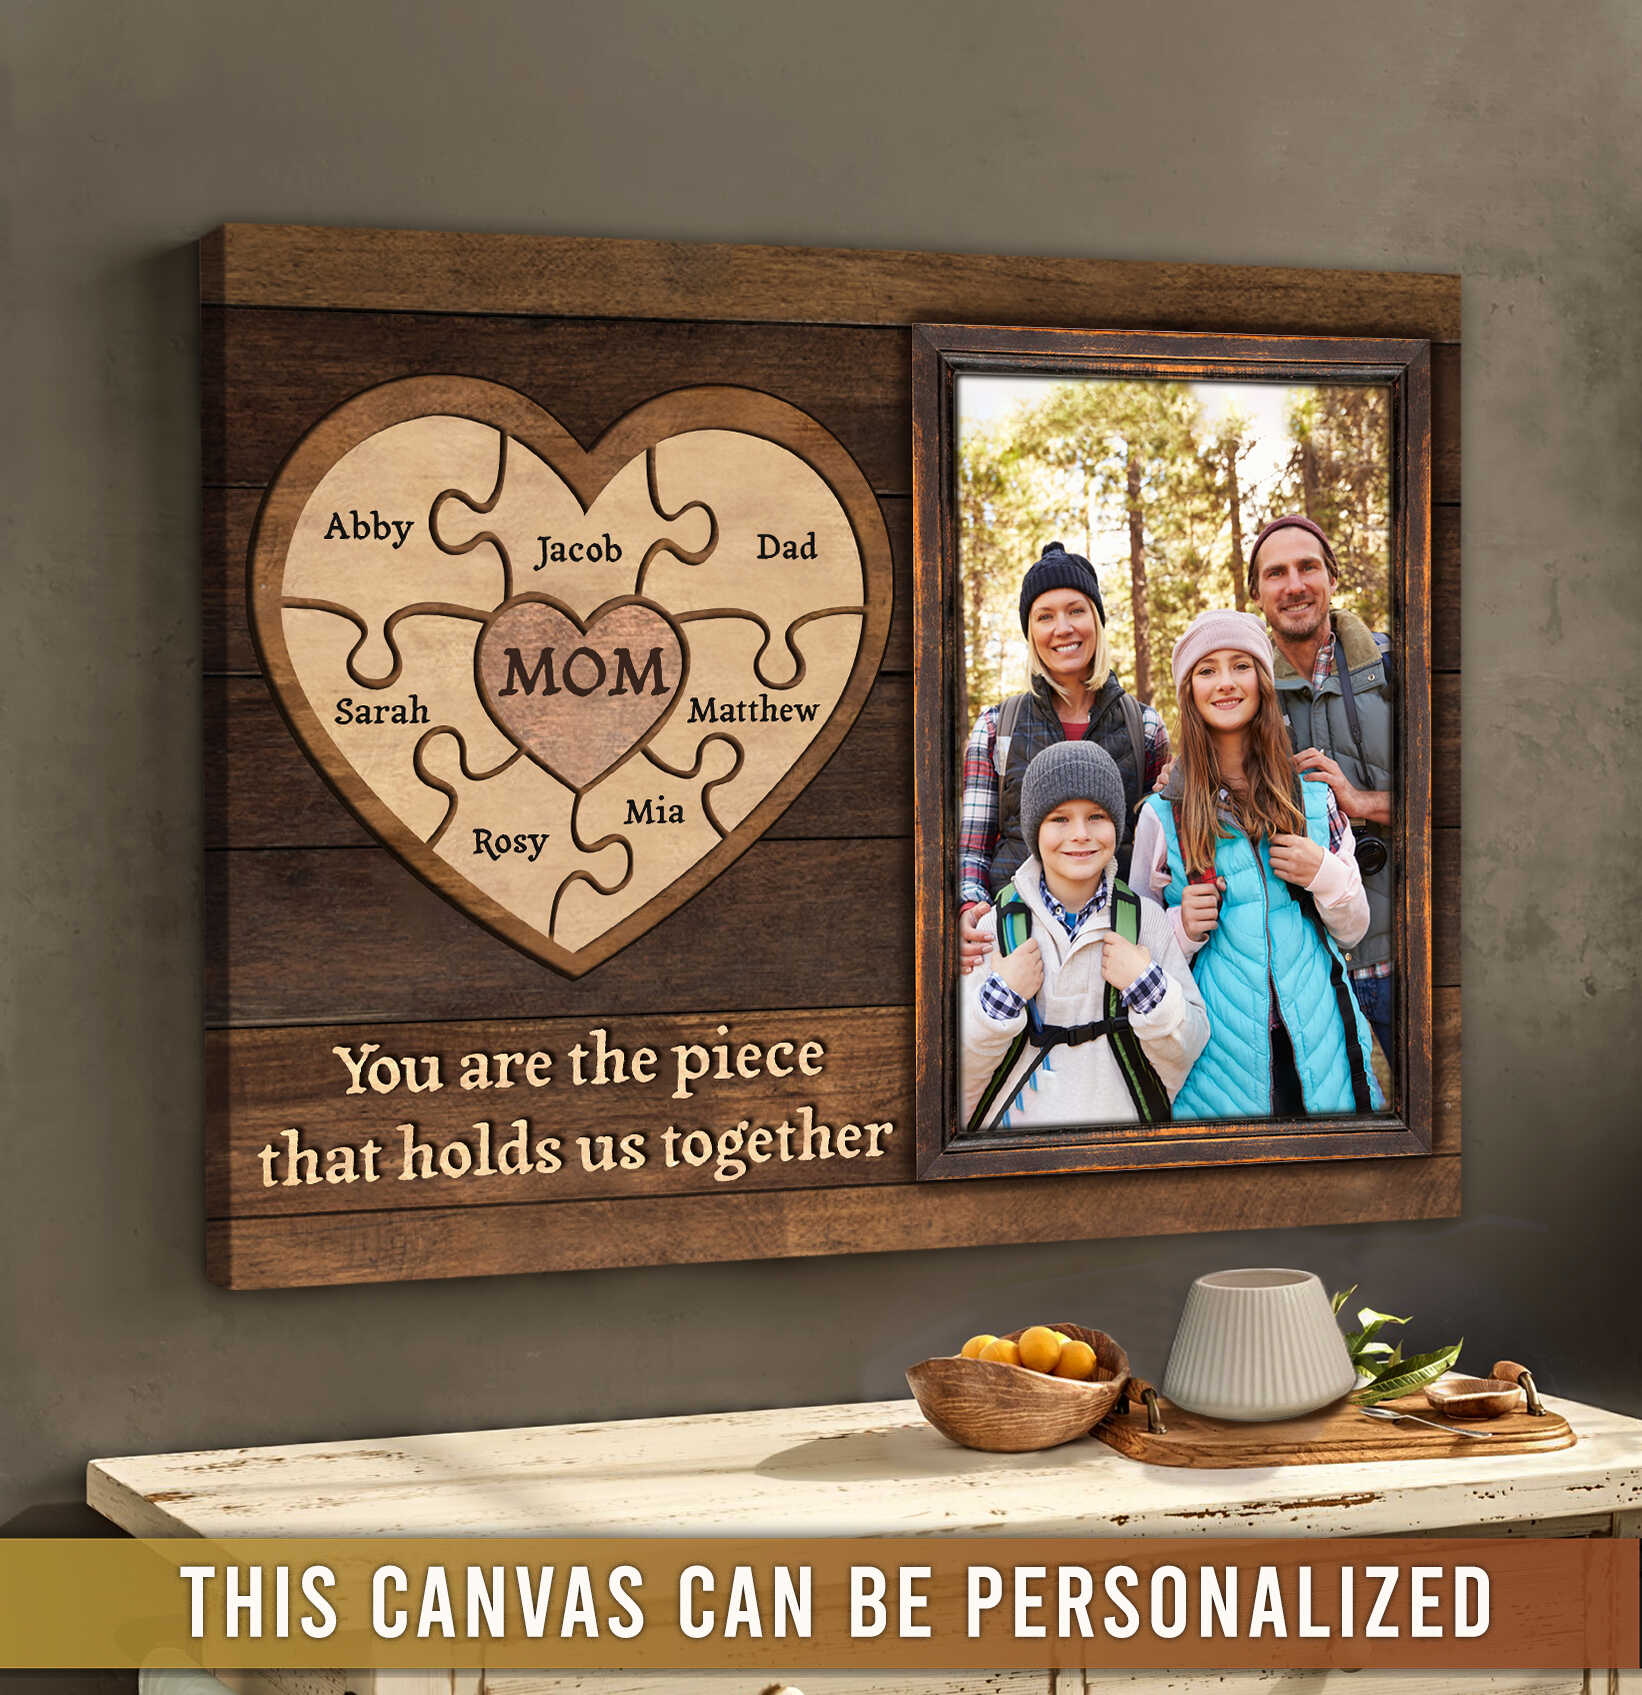 Personalized Mother's Day Gifts